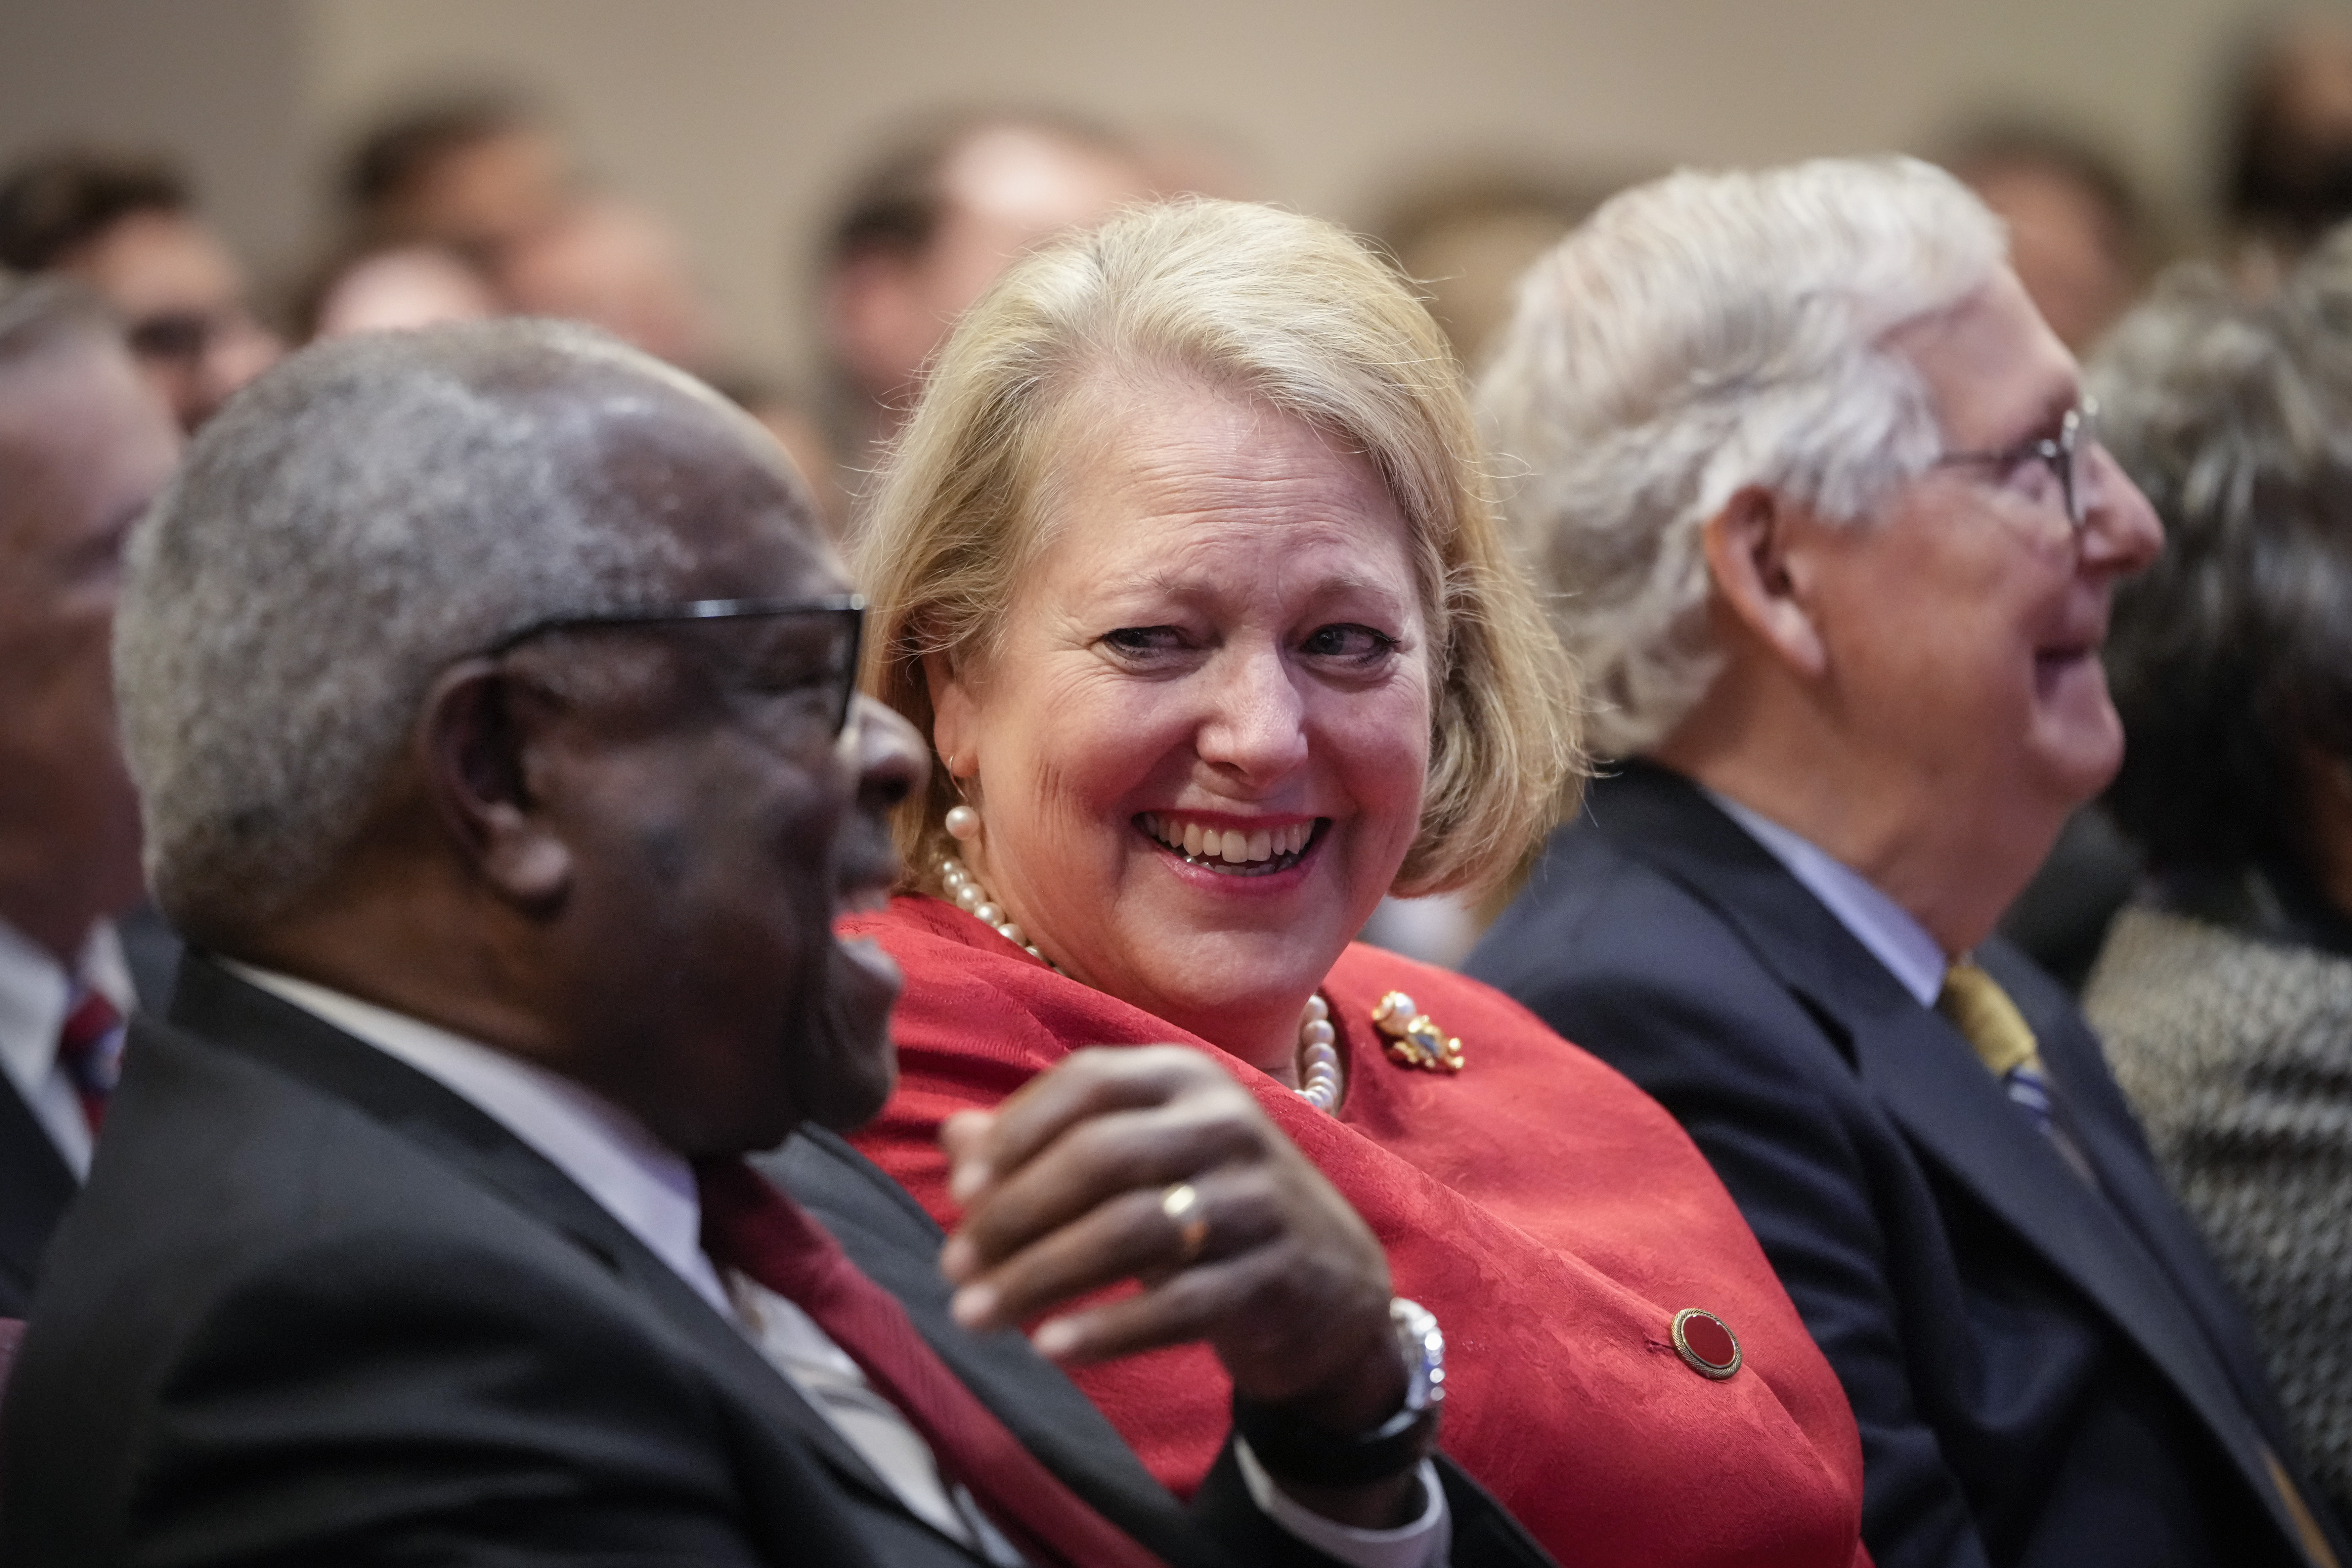 Justice Clarence Thomas, his wife Virginia Thomas, and Sen. Mitch McConnell sit in a row. 